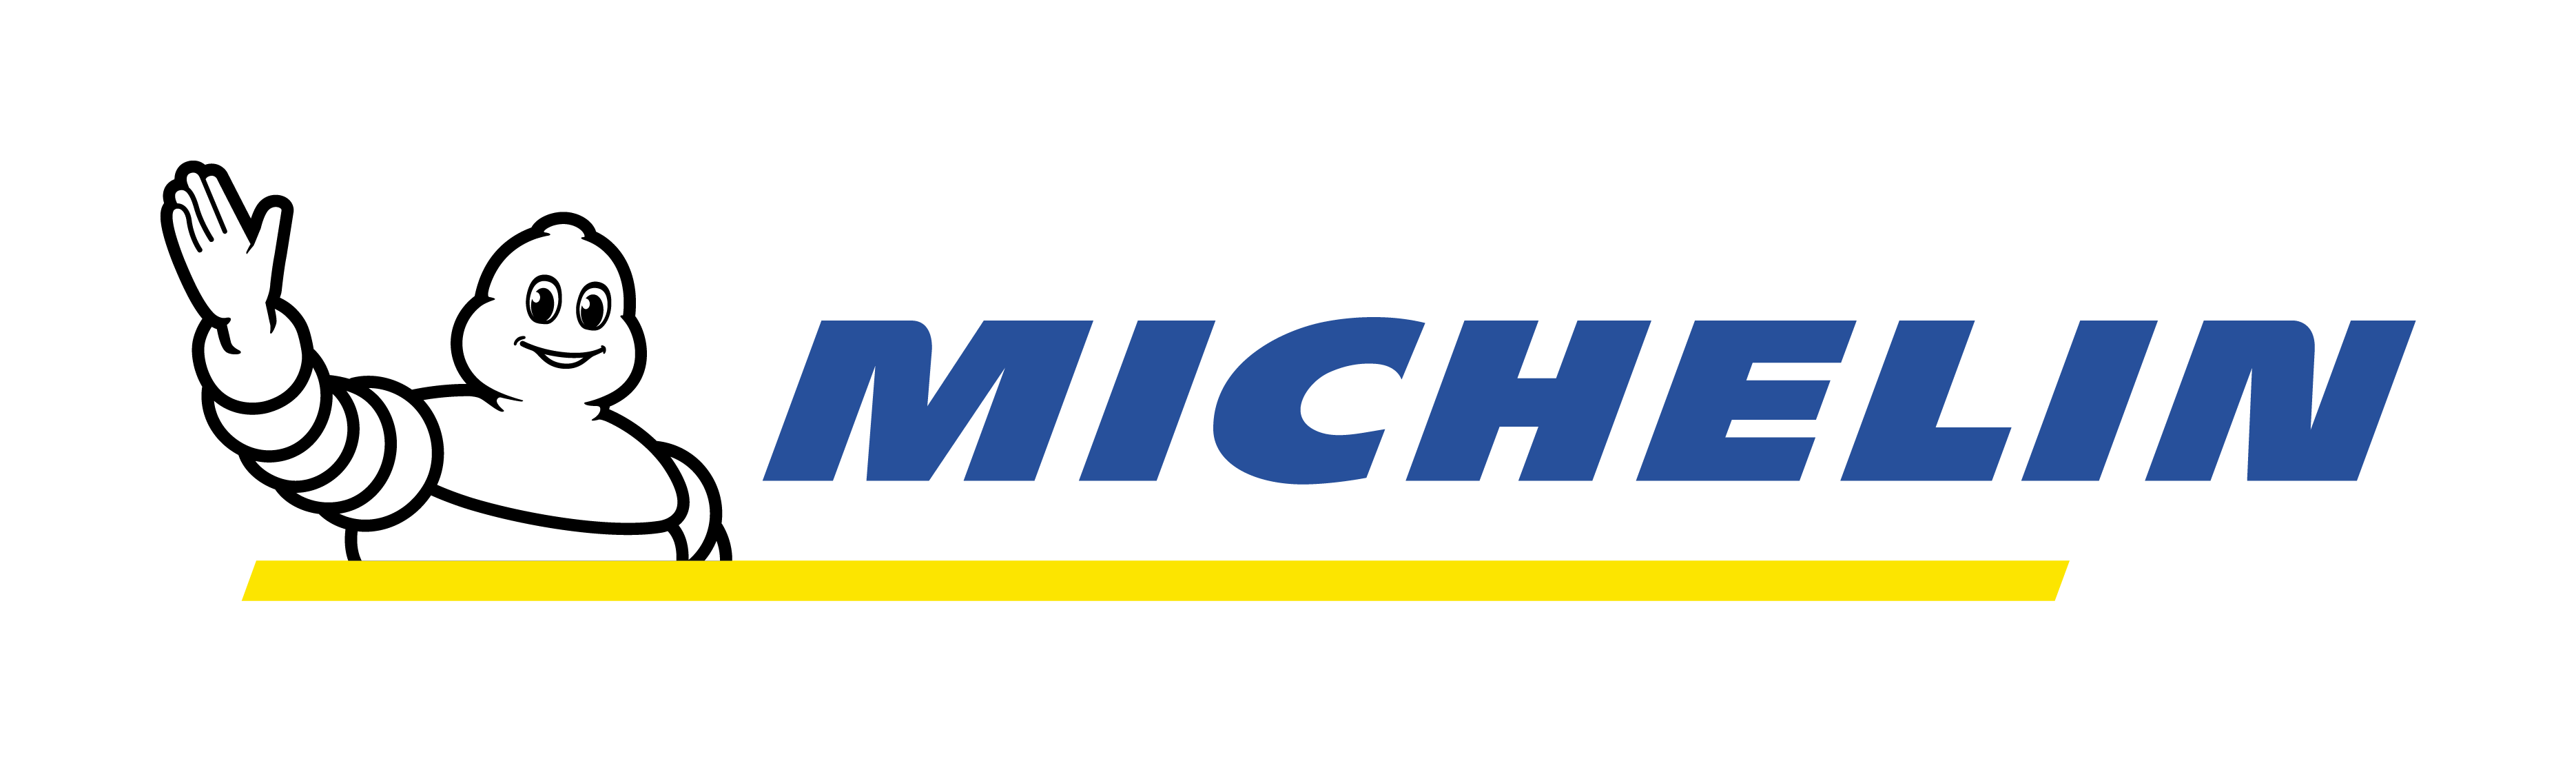 Michelin Tires Logo Png Hdpng.com 3739 - Michelin Tires, Transparent background PNG HD thumbnail